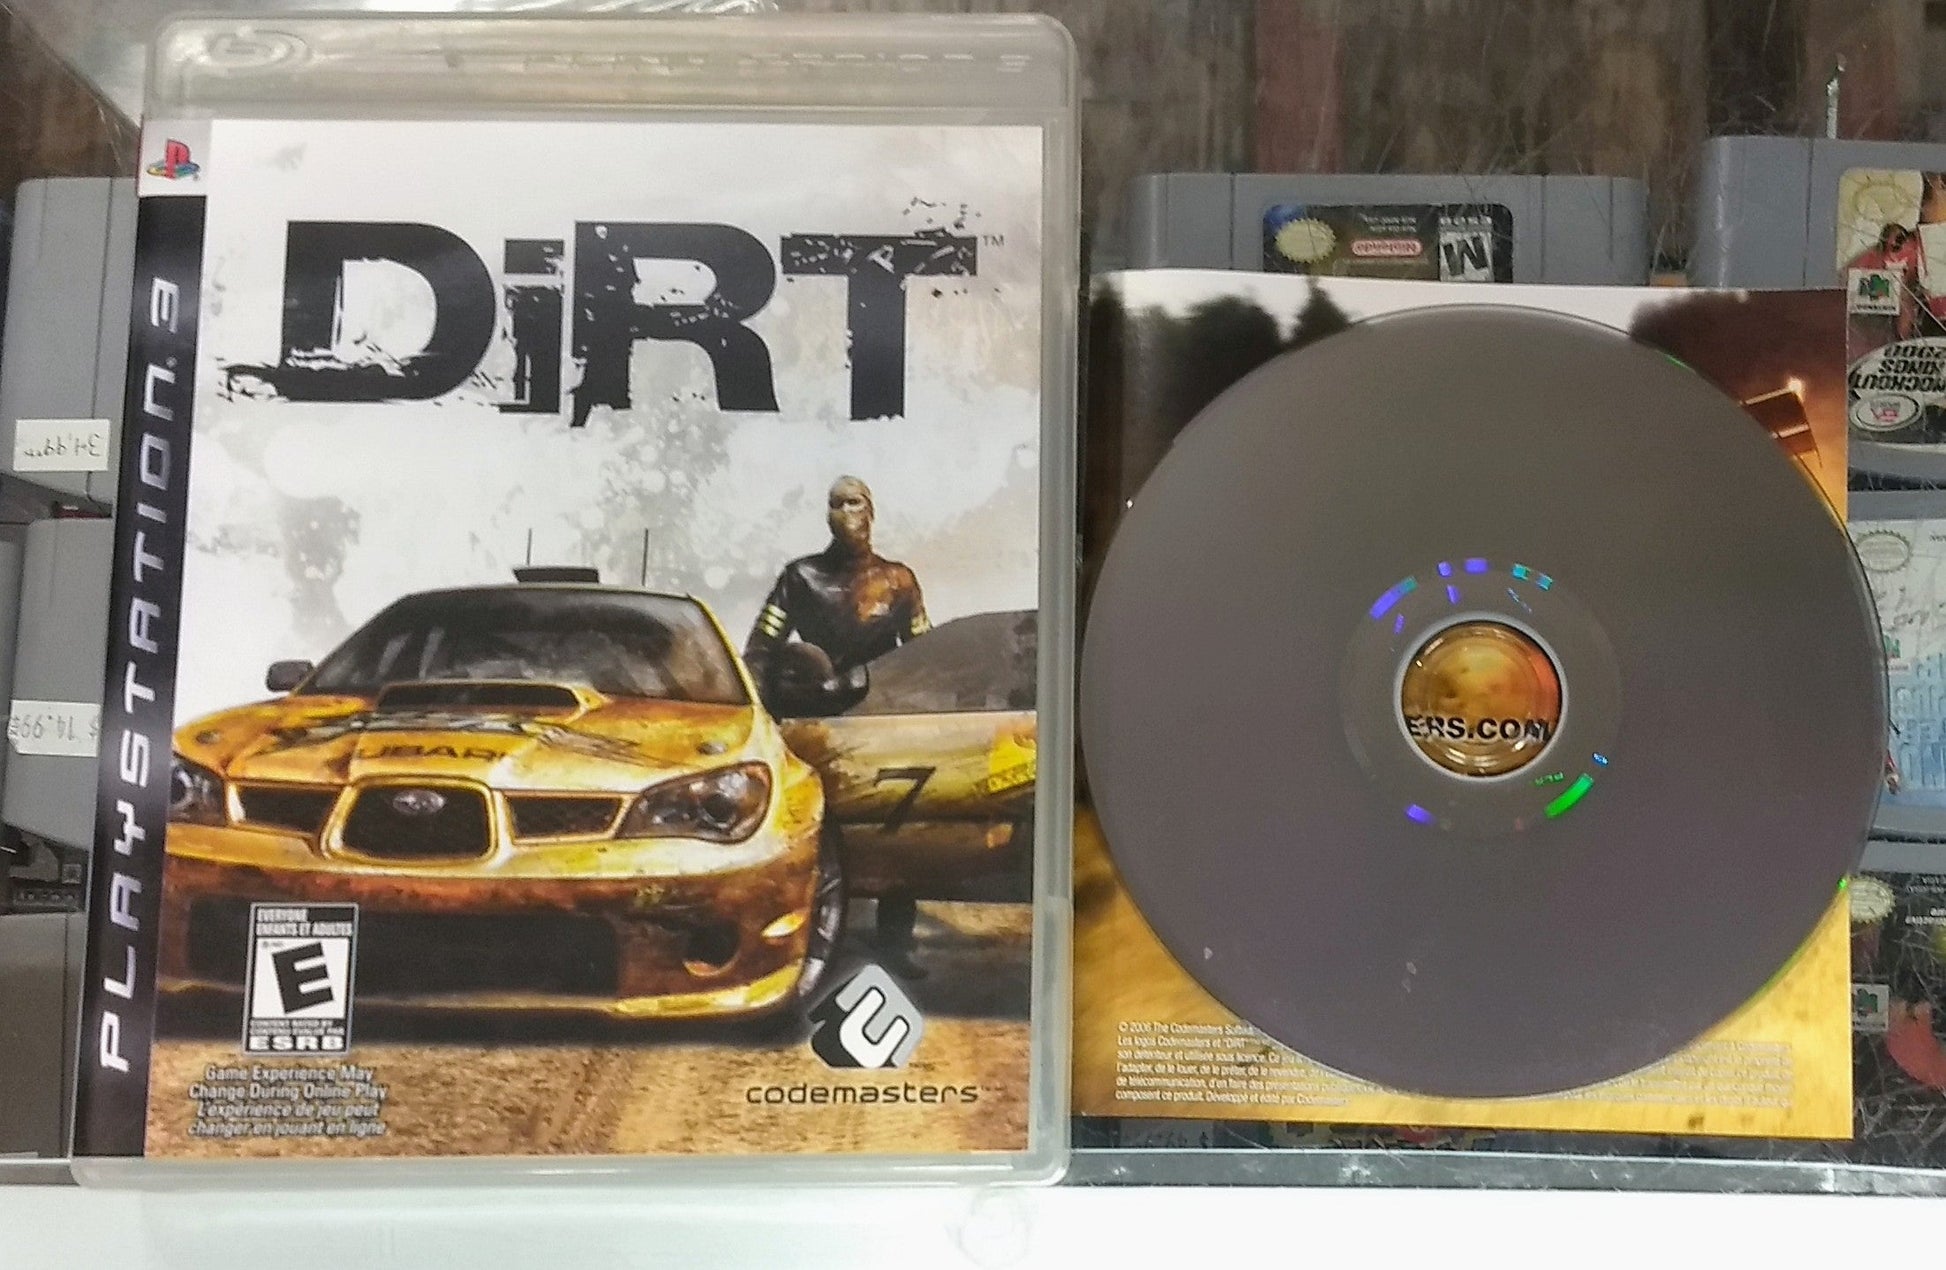 DIRT (PLAYSTATION 3 PS3) - jeux video game-x